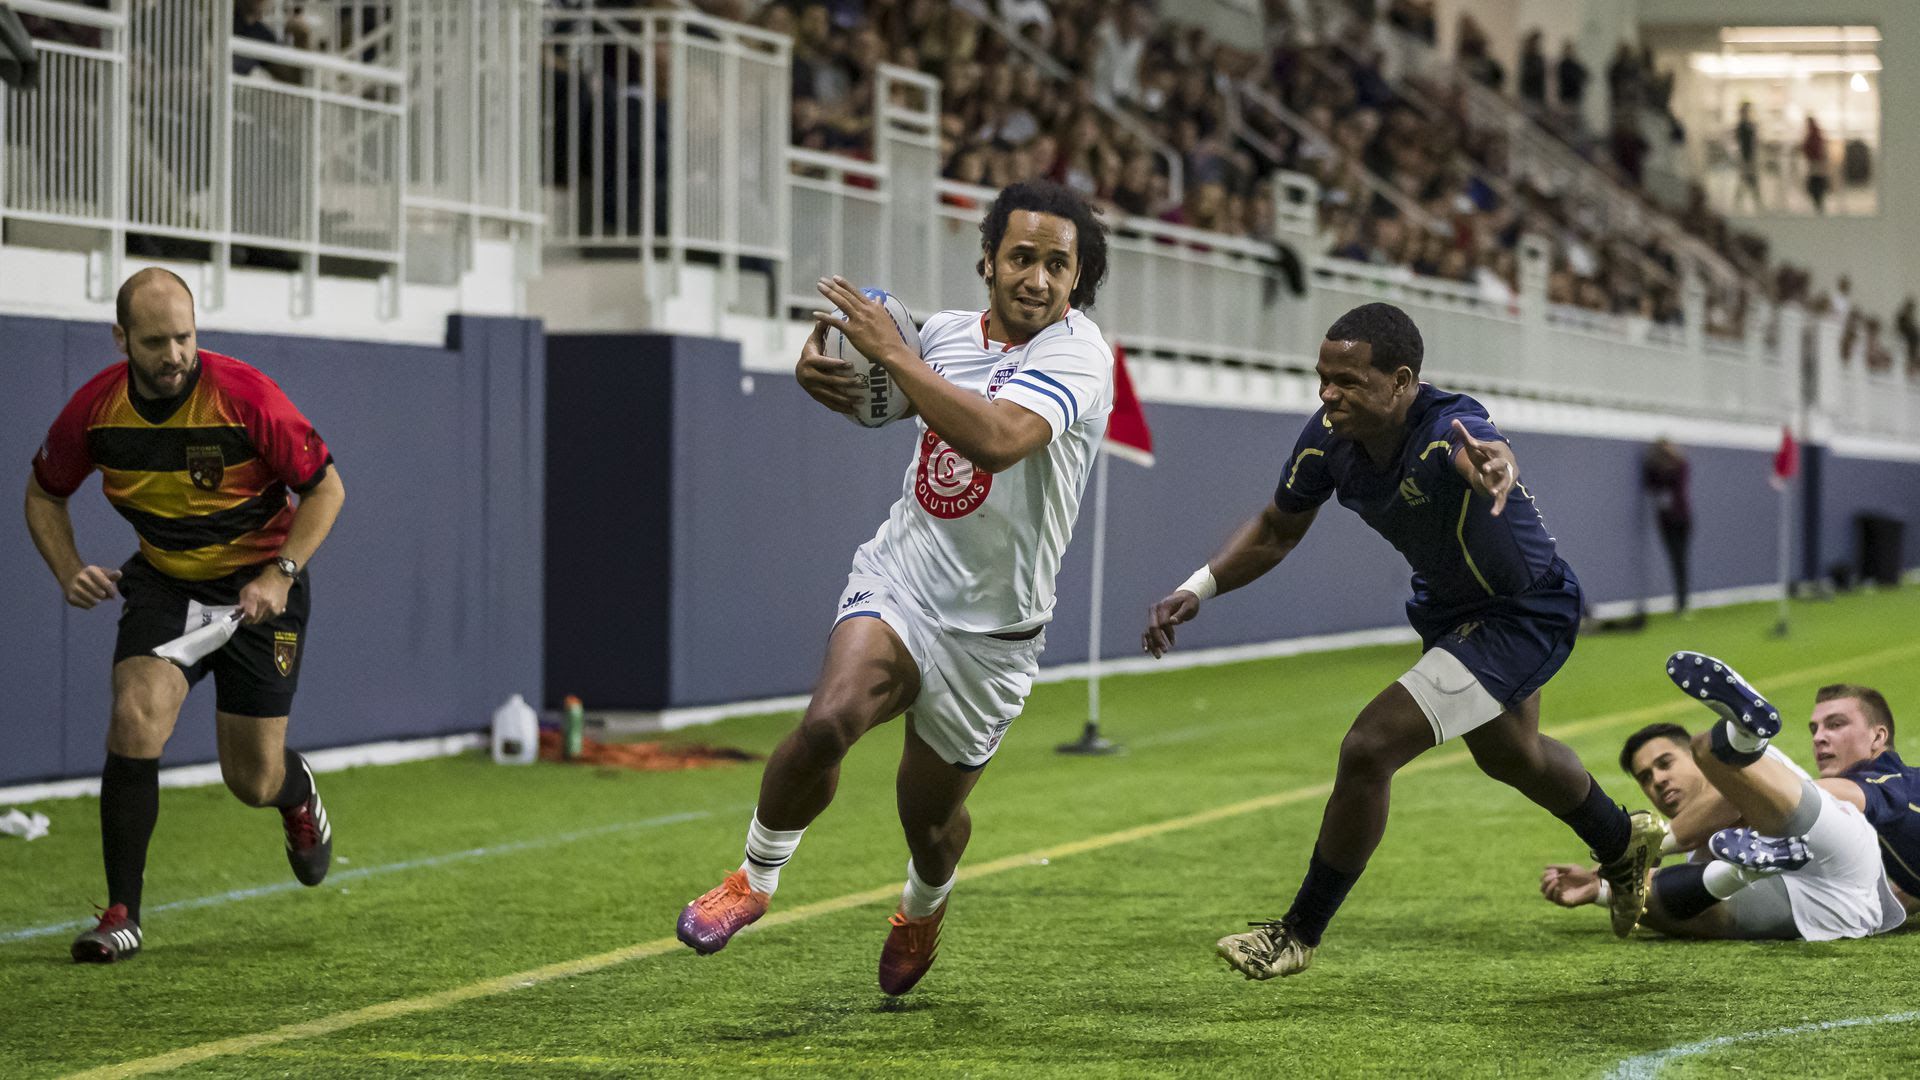 Vetekina Malafu of Old Glory DC scores a try in an exhibition match against Navy last month